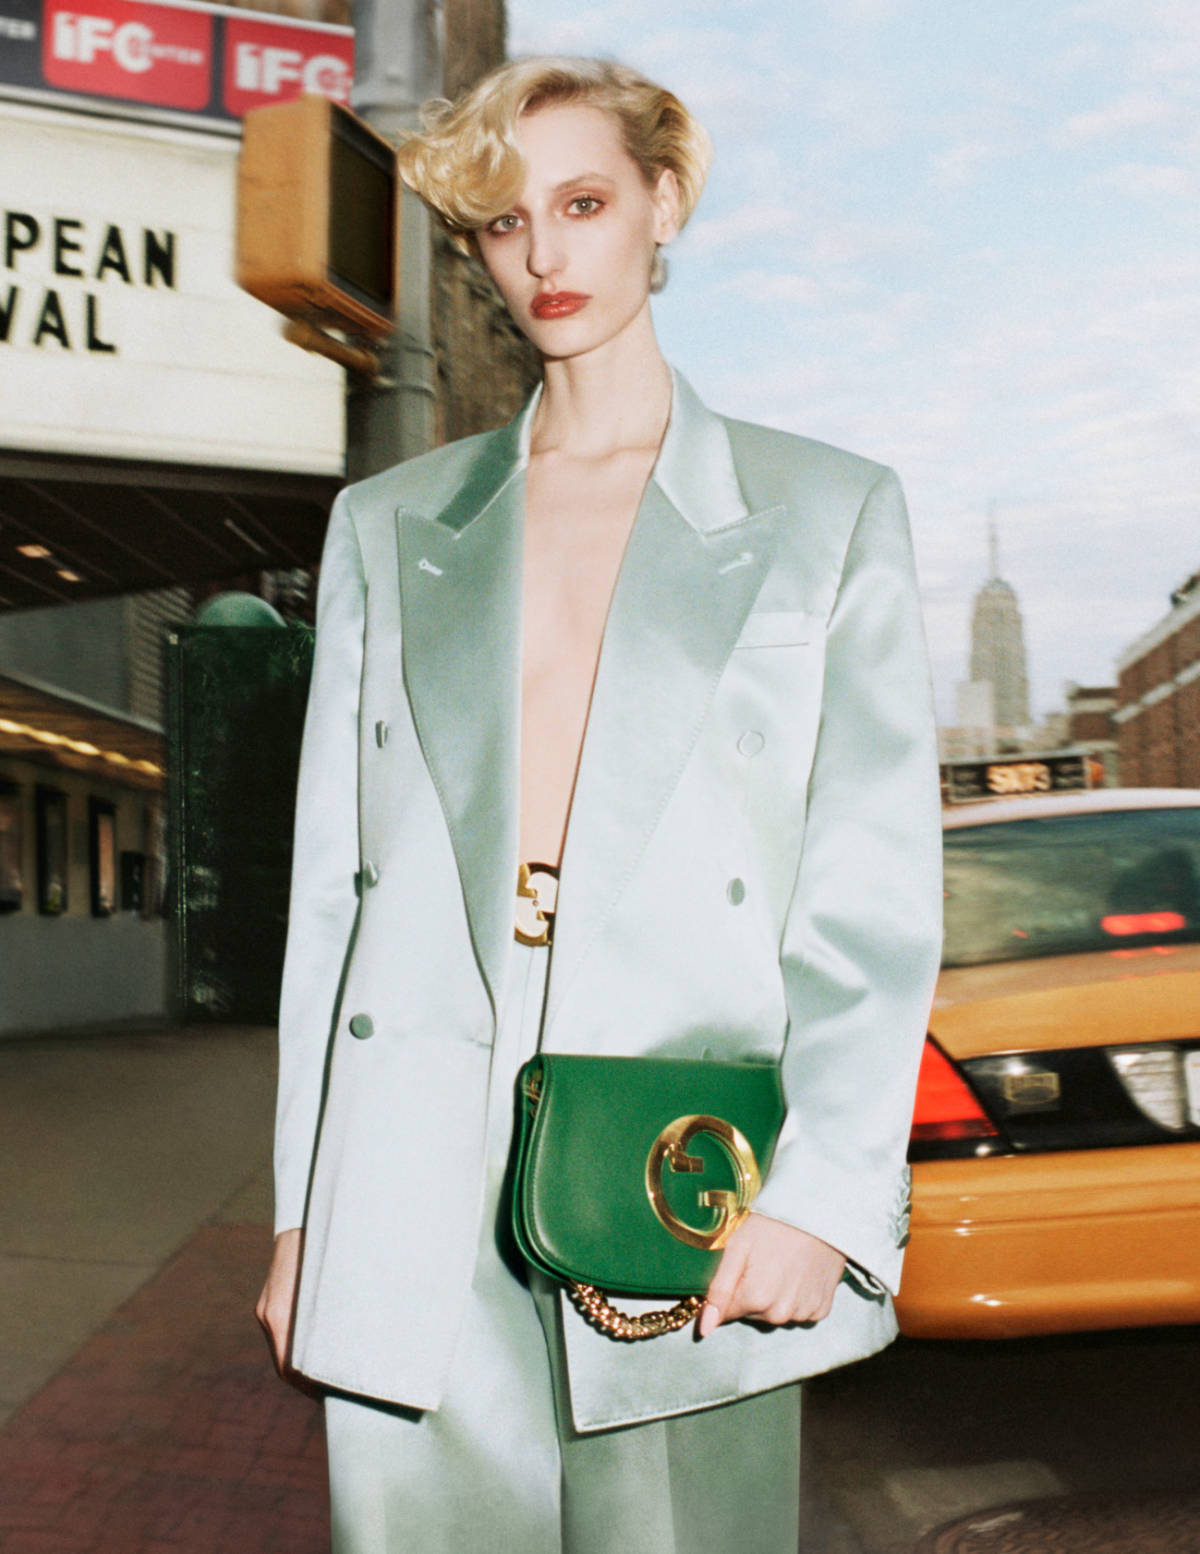 Gucci: Gucci Blondie: A New Line Of Handbags - Luxferity